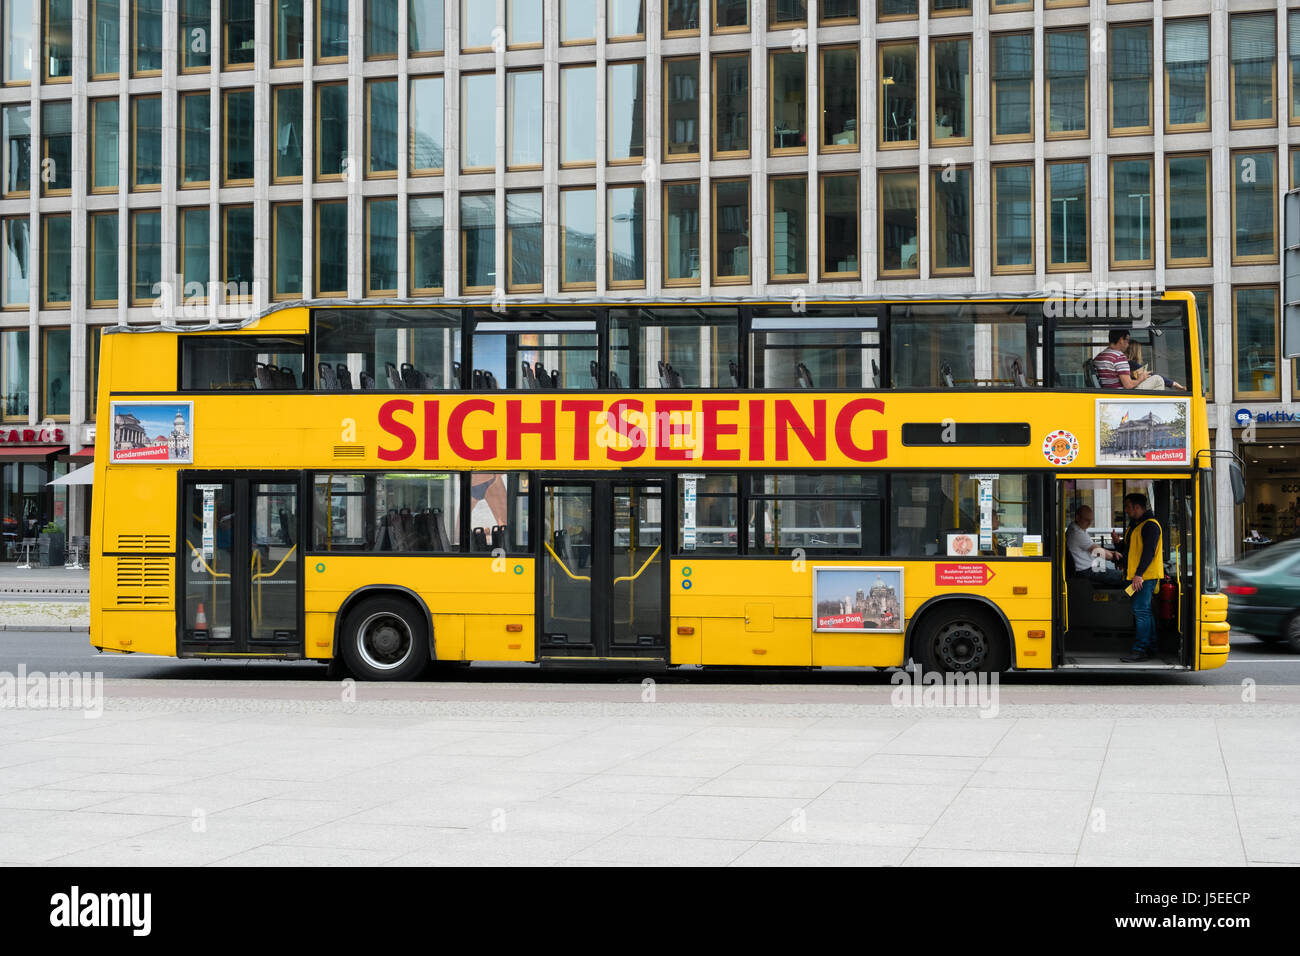 Berlin, Germany - may 16, 2017: A sightseeing bus of the 'Yellow Line' at Potsdamer Platz in Berlin, Germany. Stock Photo